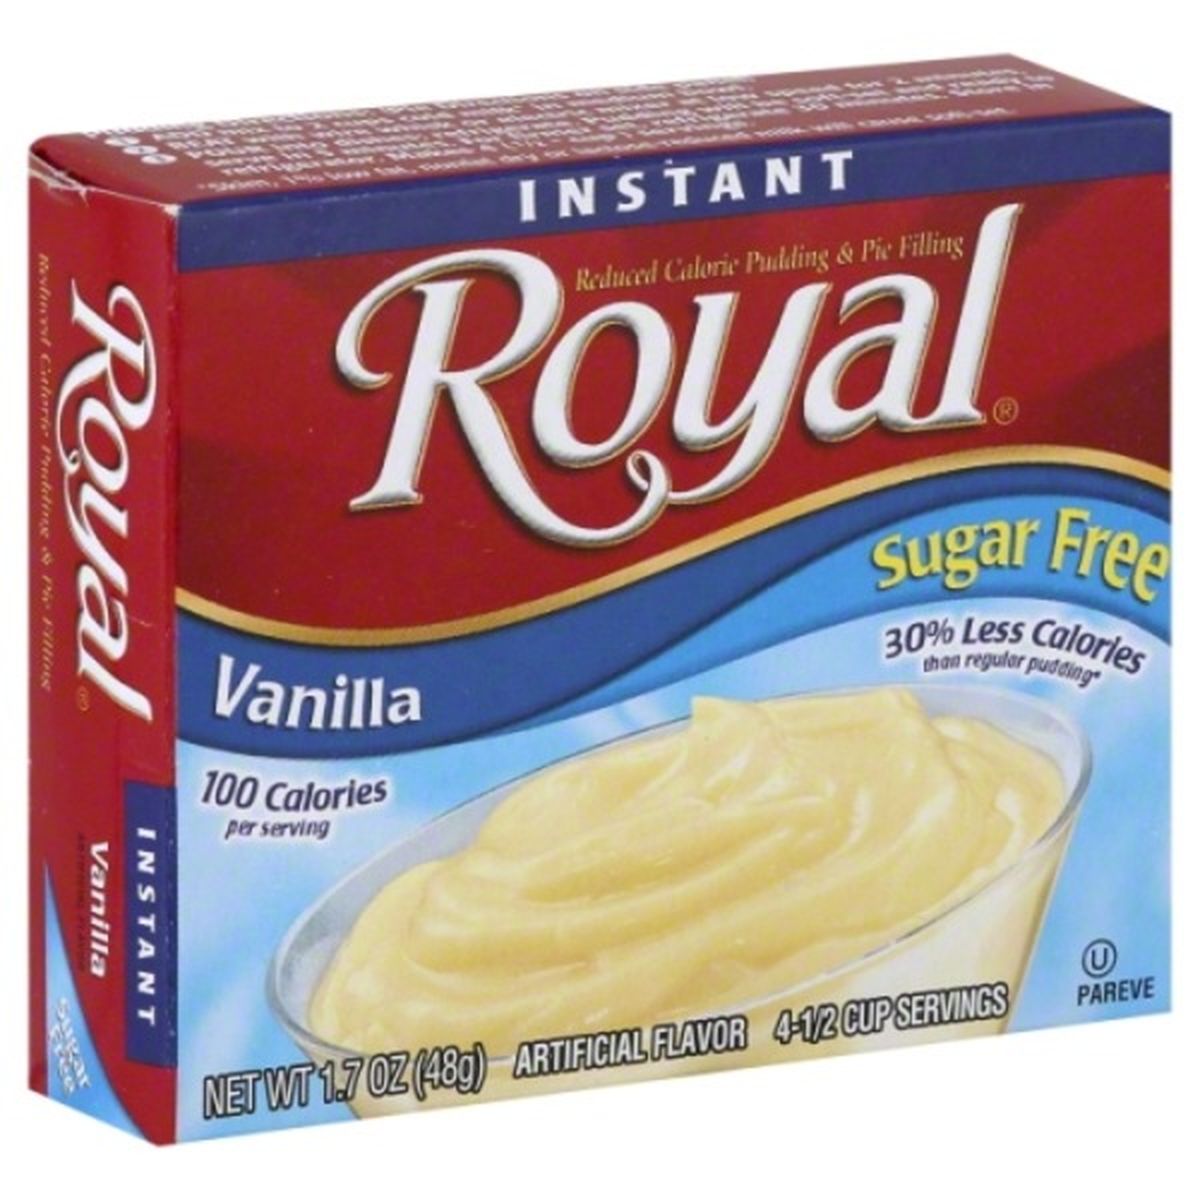 Calories in Royal Instant Pudding & Pie Filling, Reduced Calorie, Sugar Free, Vanilla